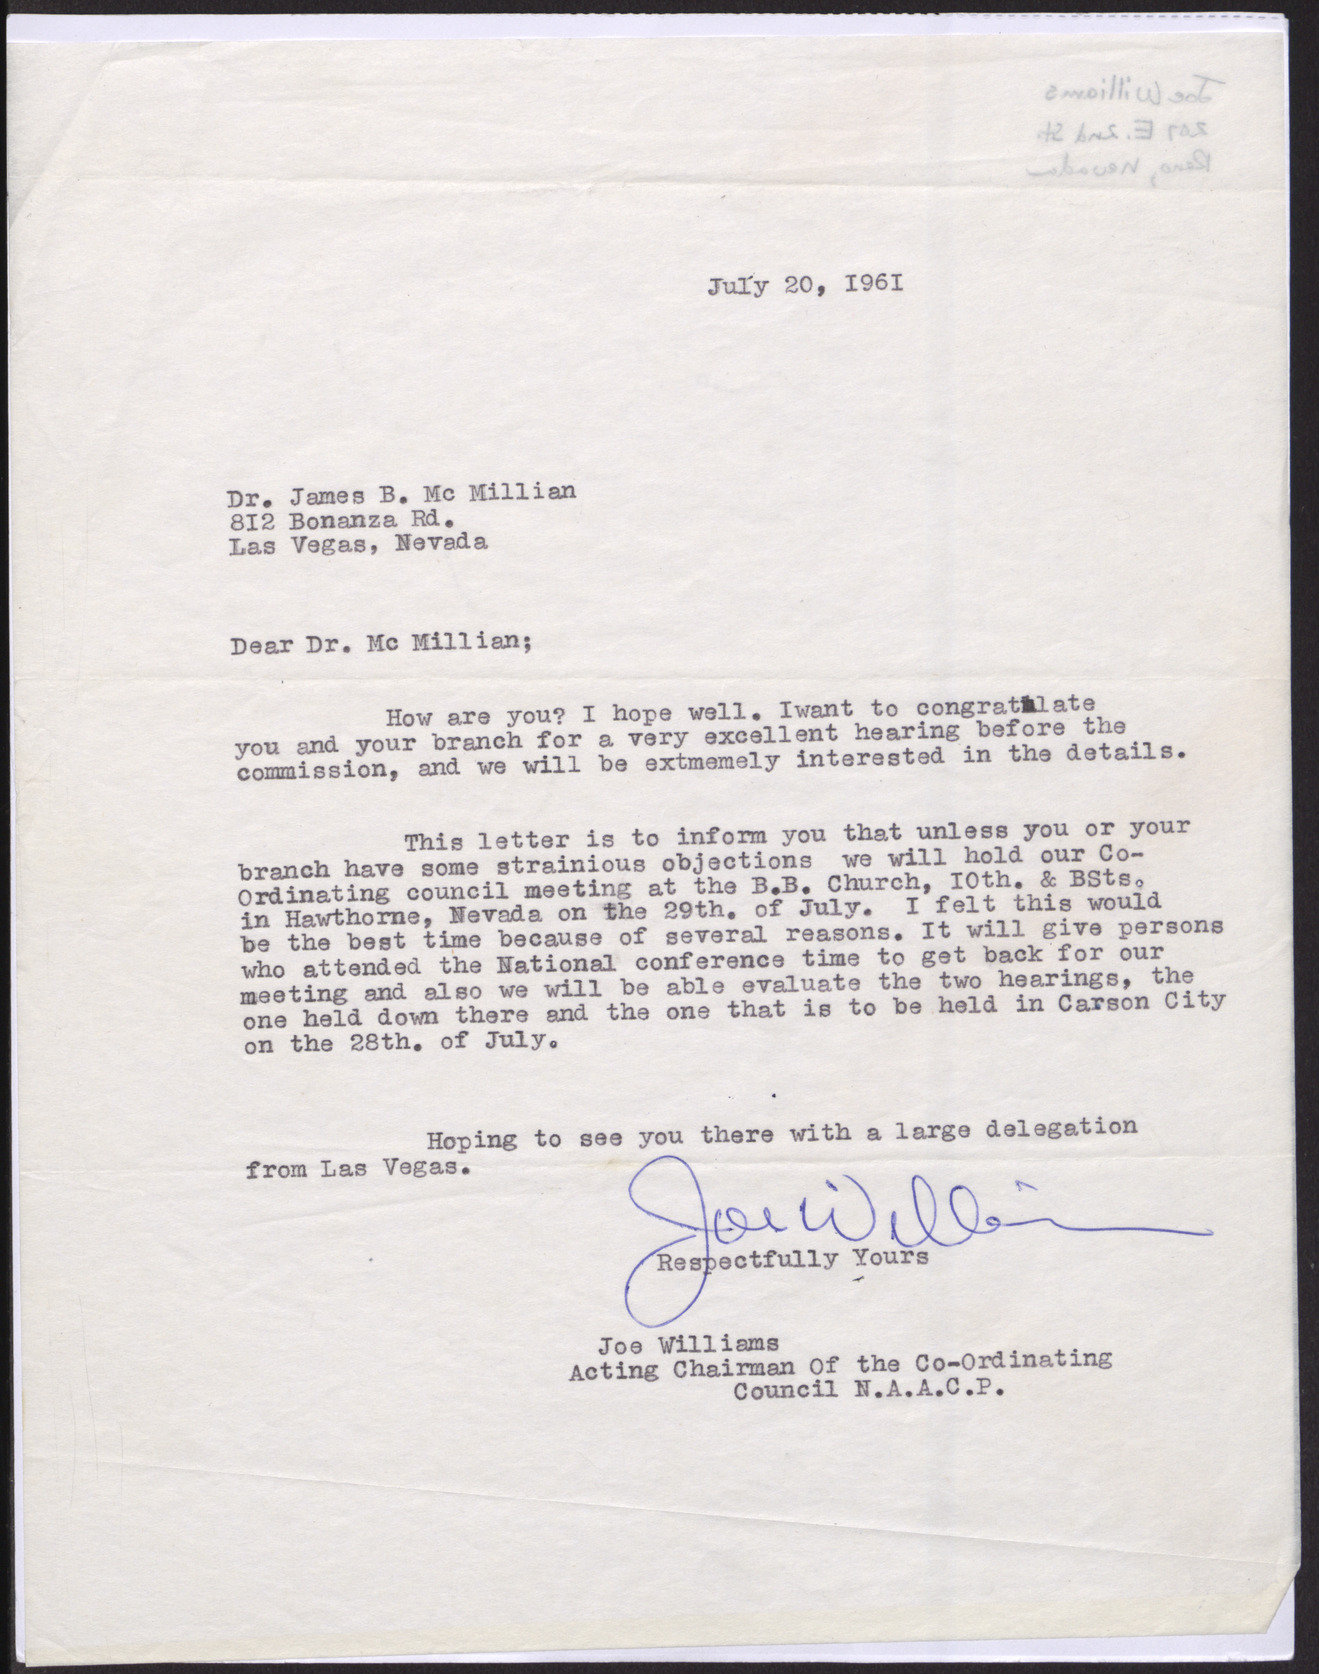 Letter to Dr. James B. McMillan from Joe Williams, July 20, 1961